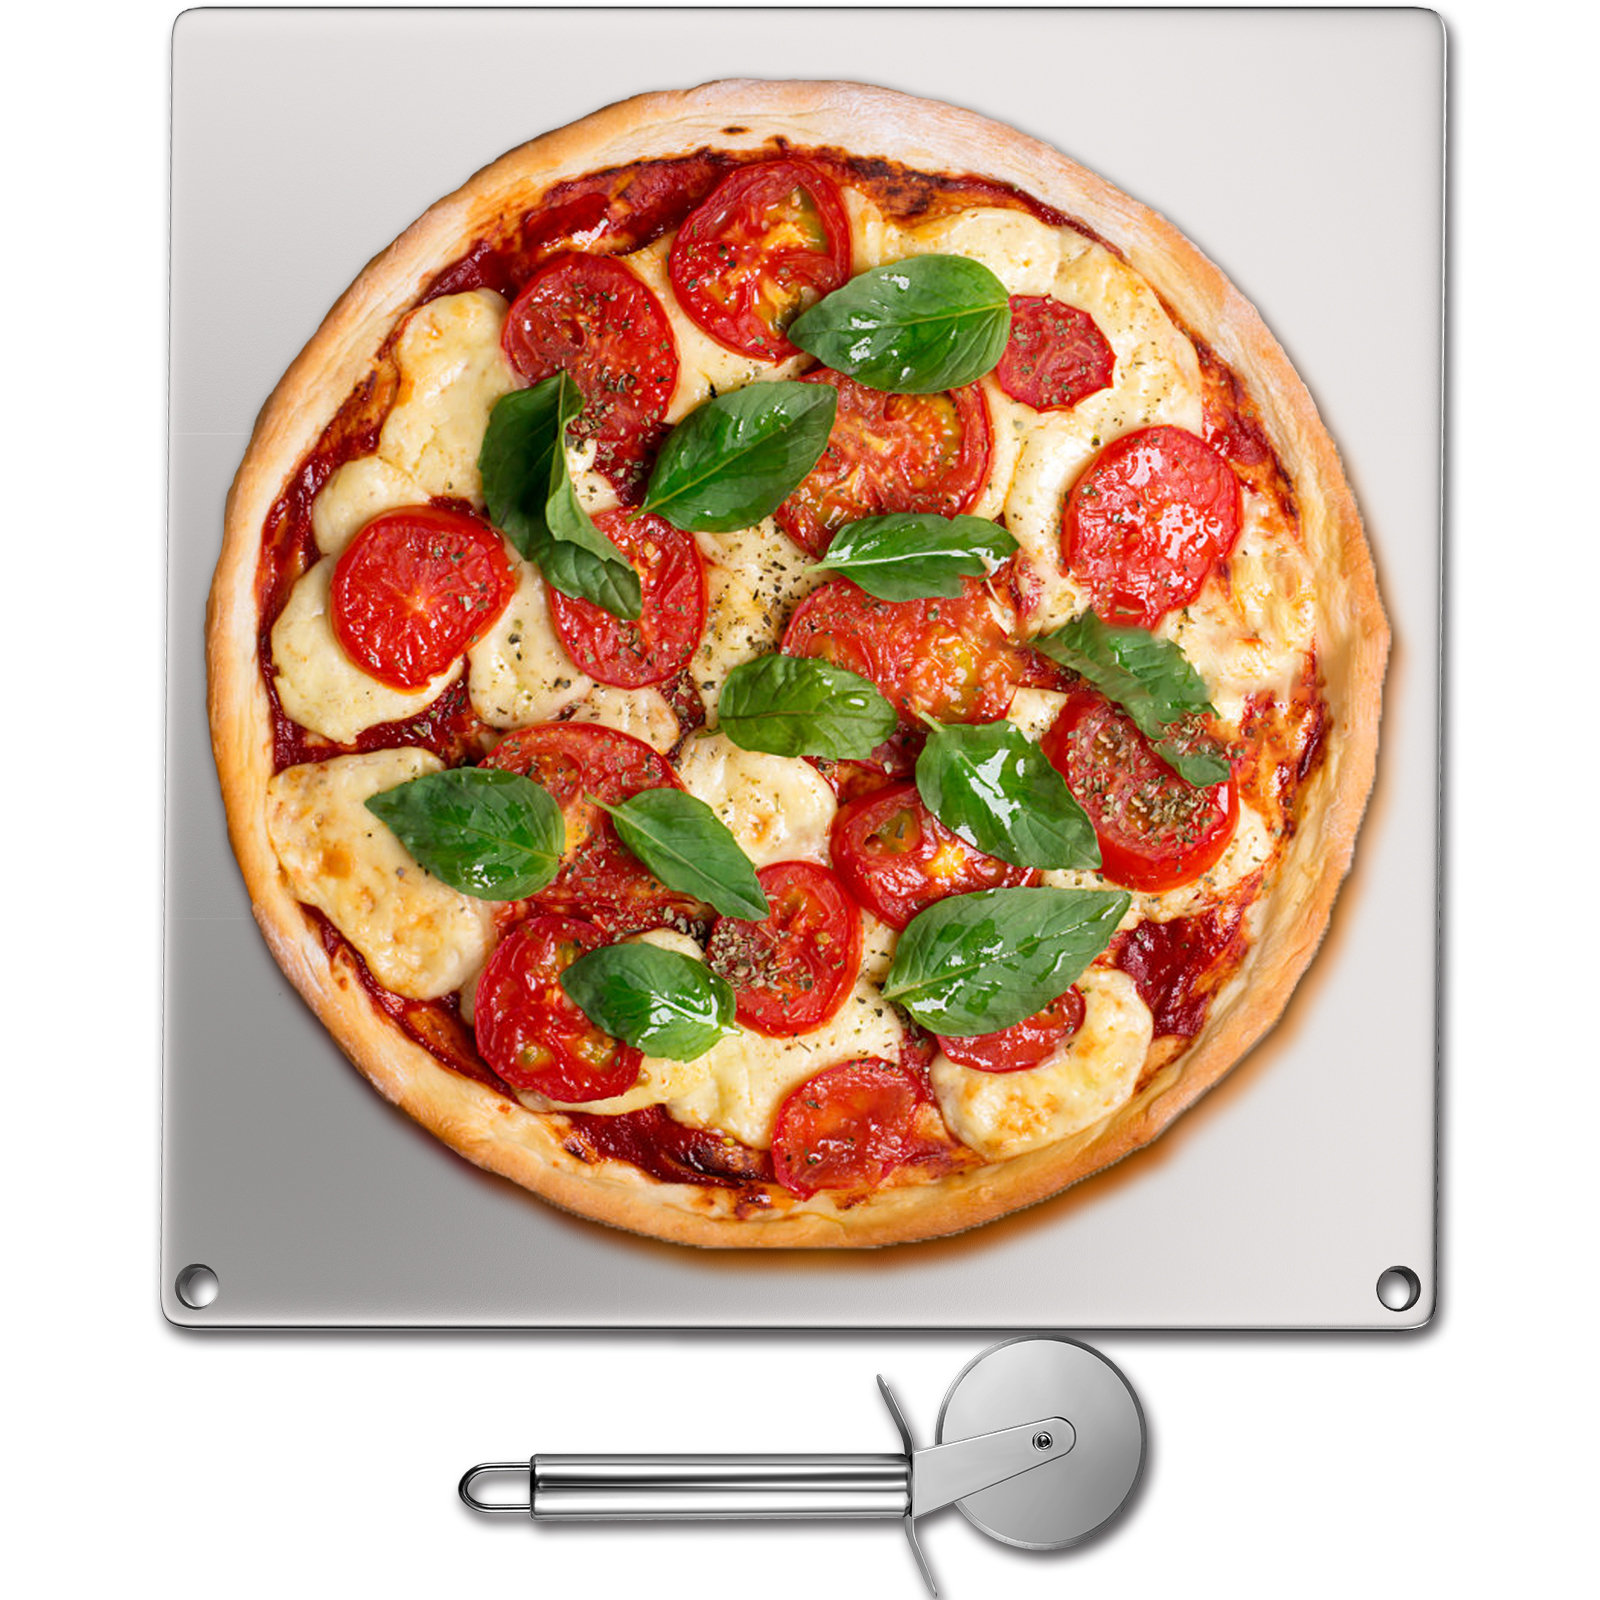 Pizza Pan Pizza Baking Pan Black Baking Sheets For Oven Nonstick Round  Pizza Tray 9 Inch Bakeware Carbon Steel Sheet Pans For Cooking  Multifunction 